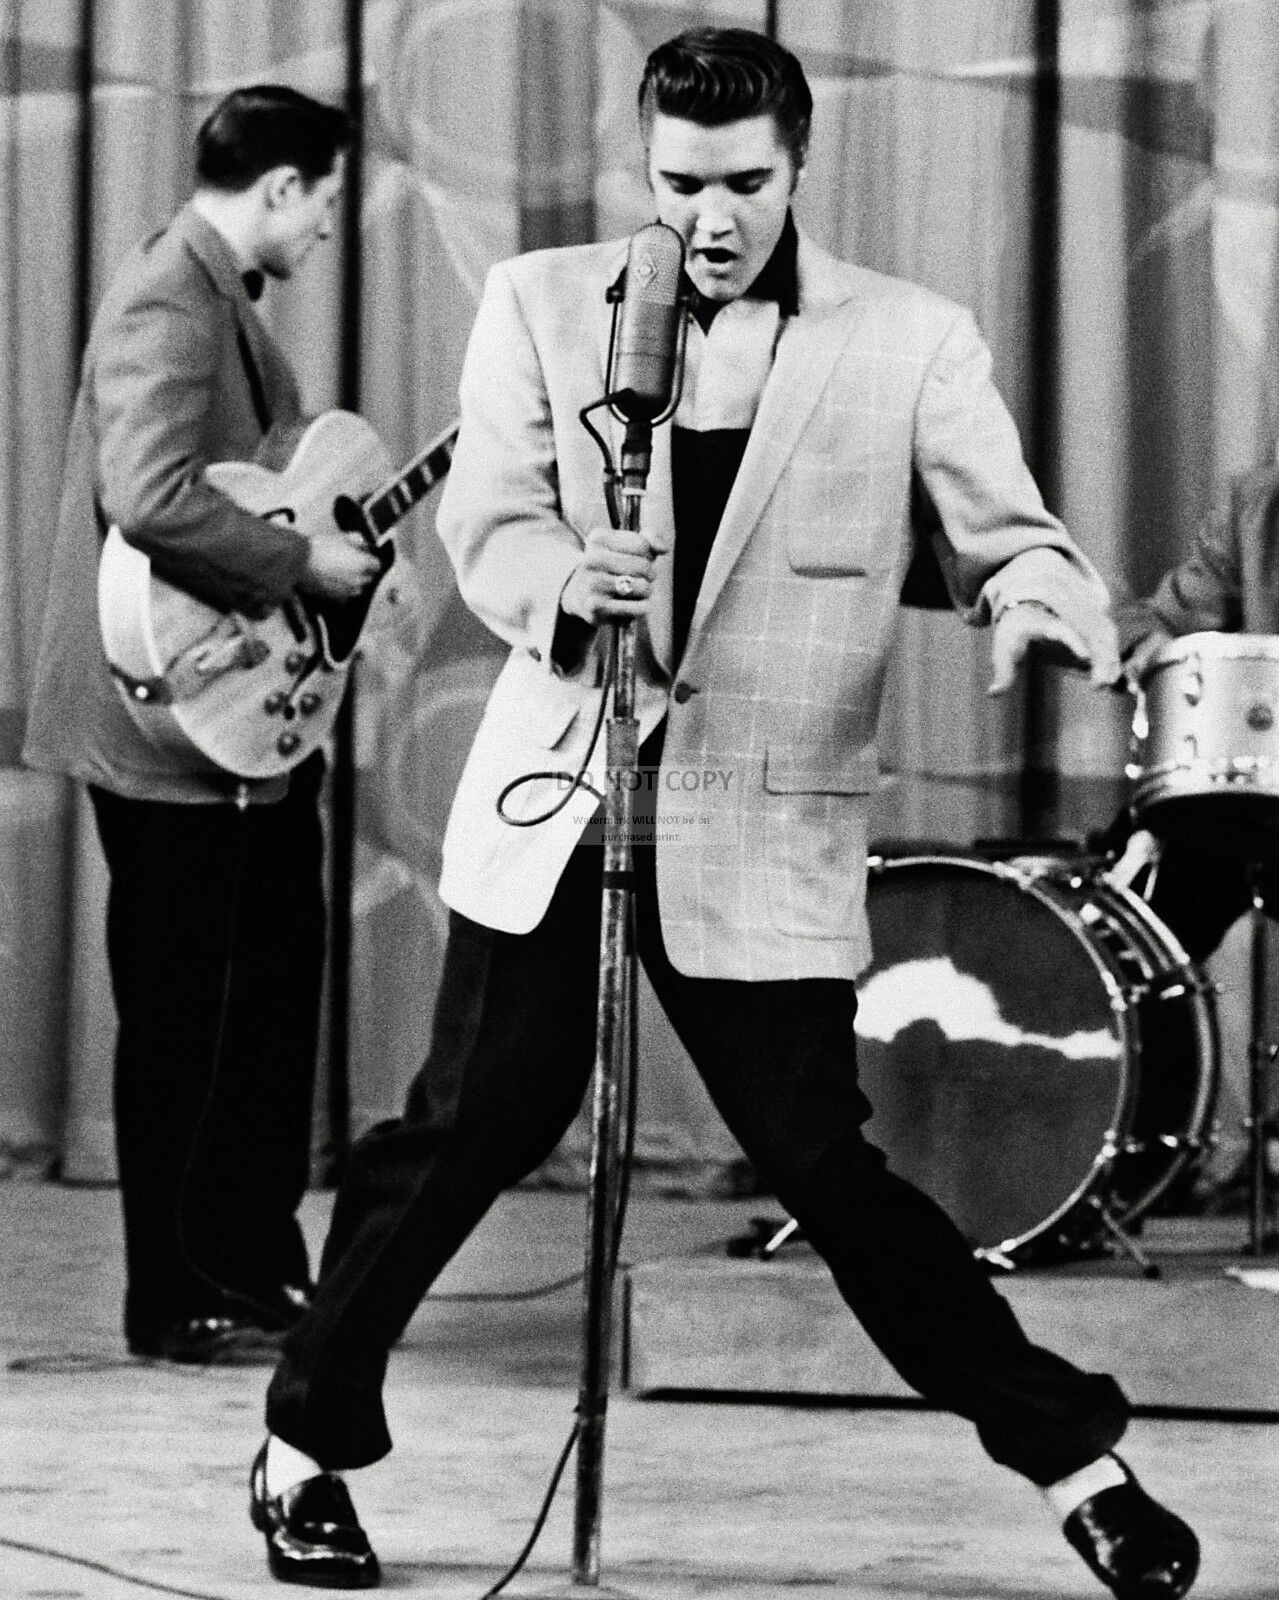 ELVIS PRESLEY ACTOR AND MUSICIAN - 8X10 PUBLICITY PHOTO (EP-897)